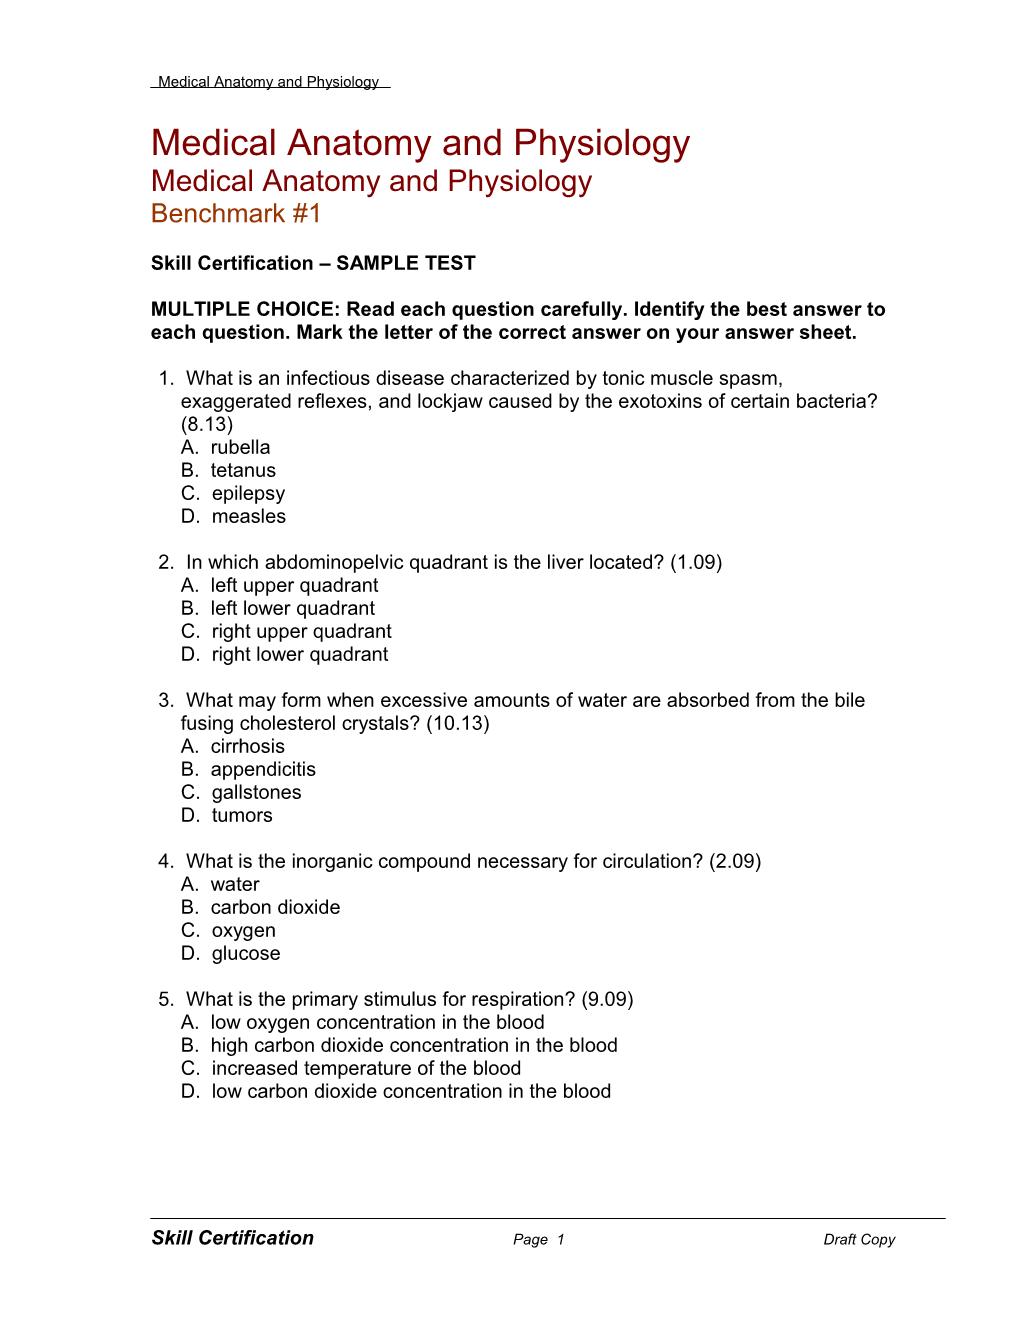 Medical Anatomy and Physiology